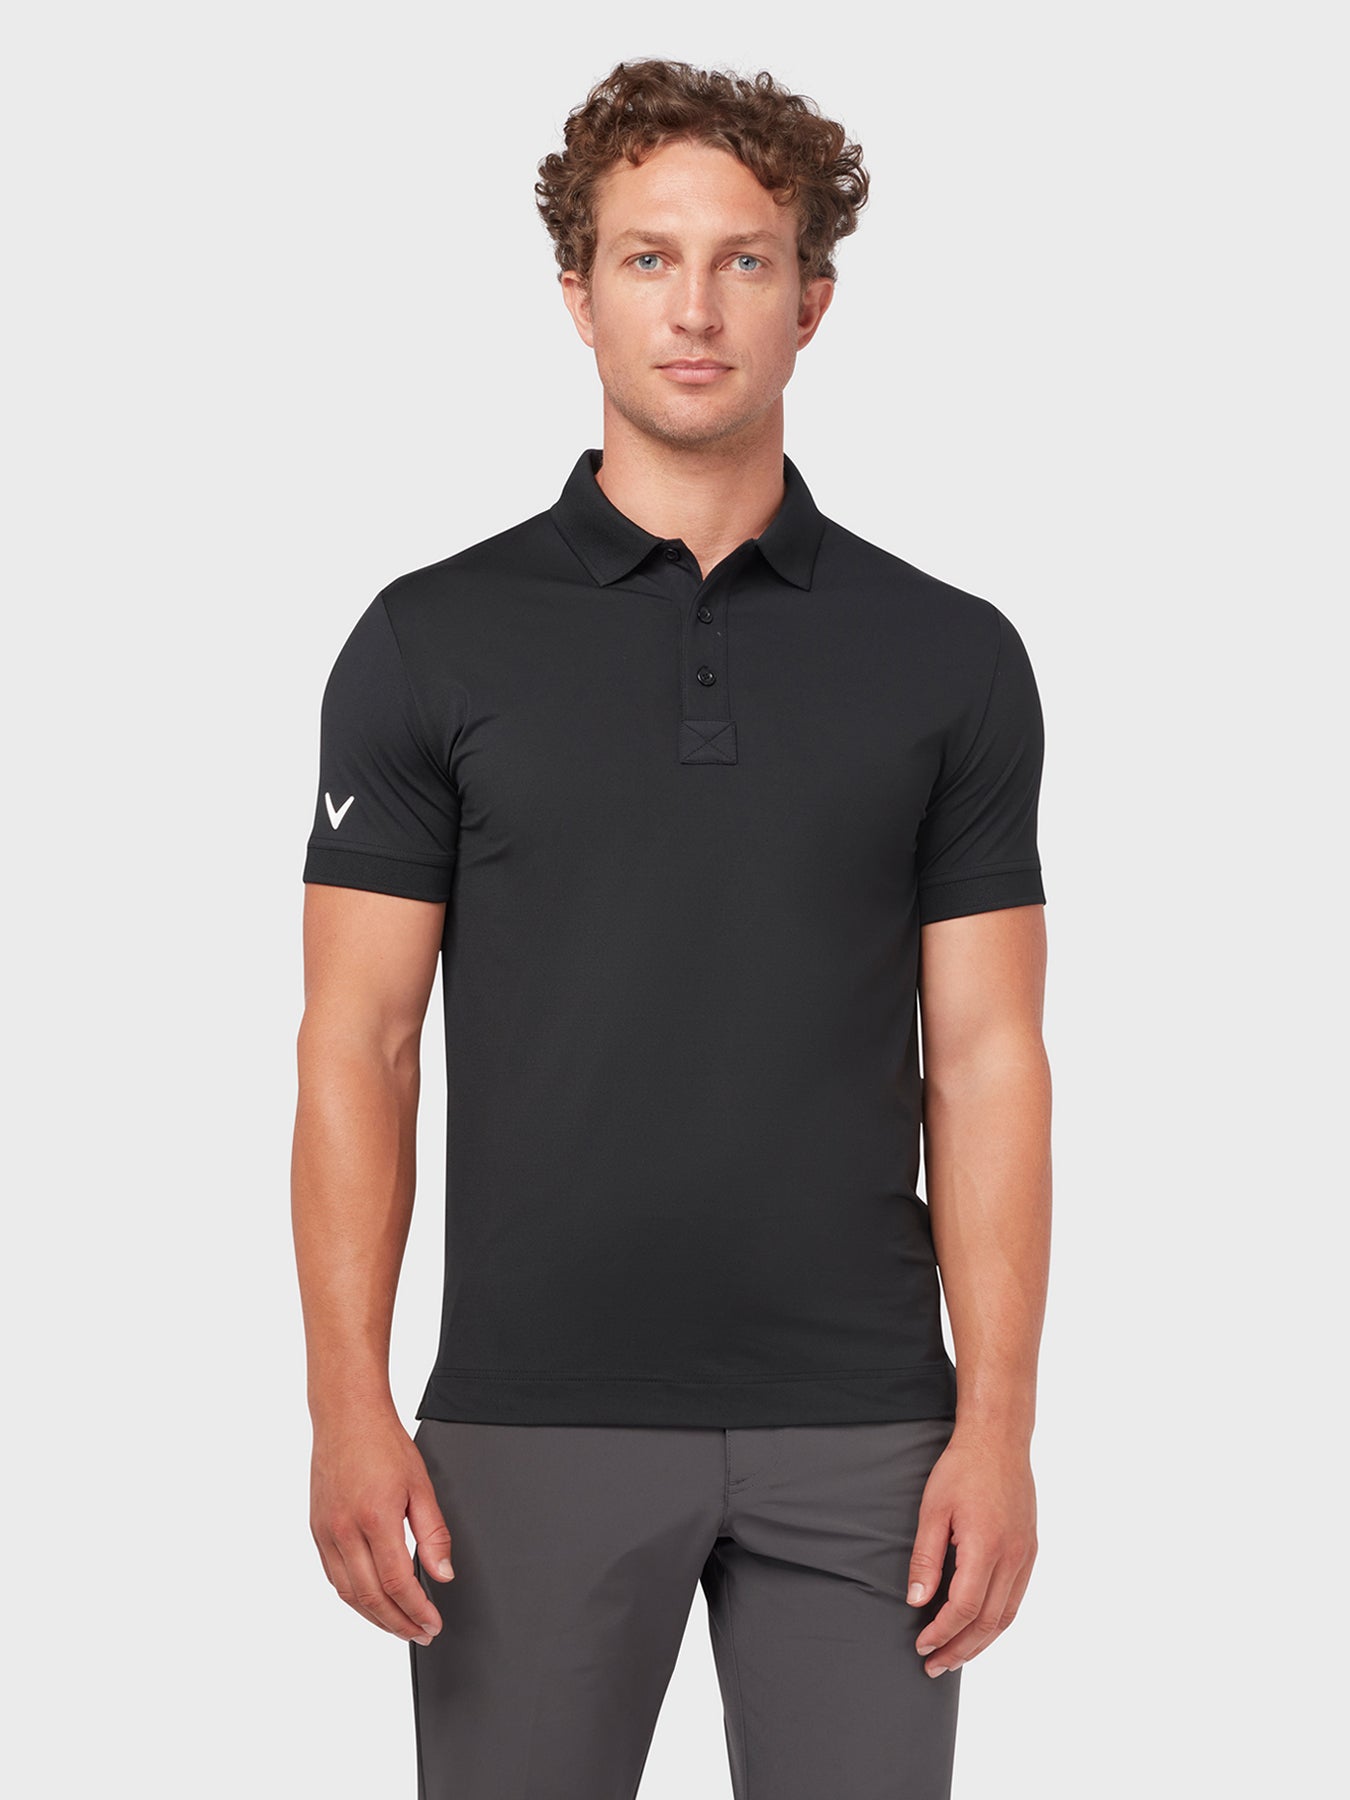 View X Series Solid Ribbed Polo In Caviar Caviar L information